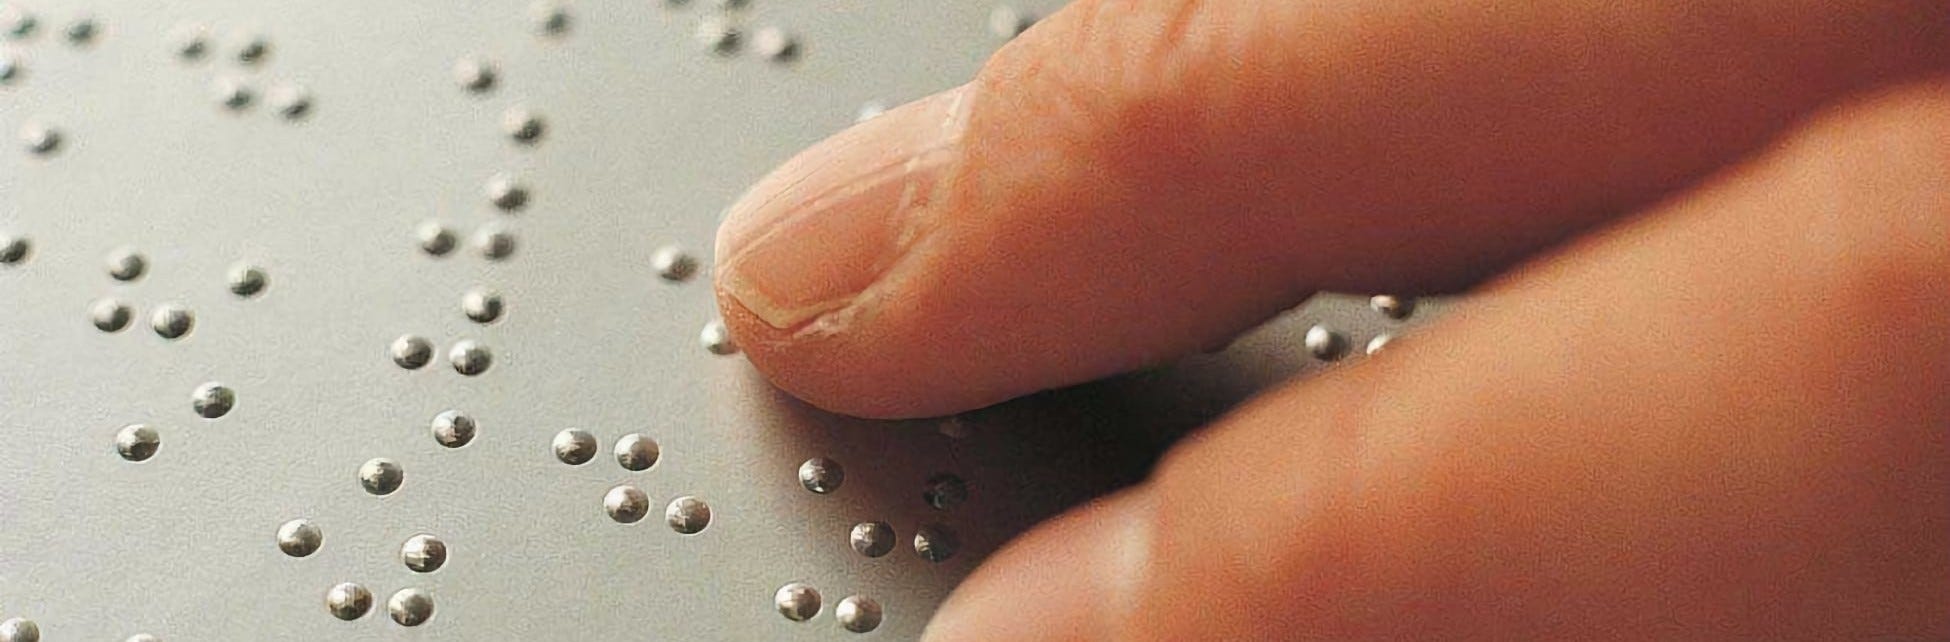 Celebrate National Braille Literacy Month